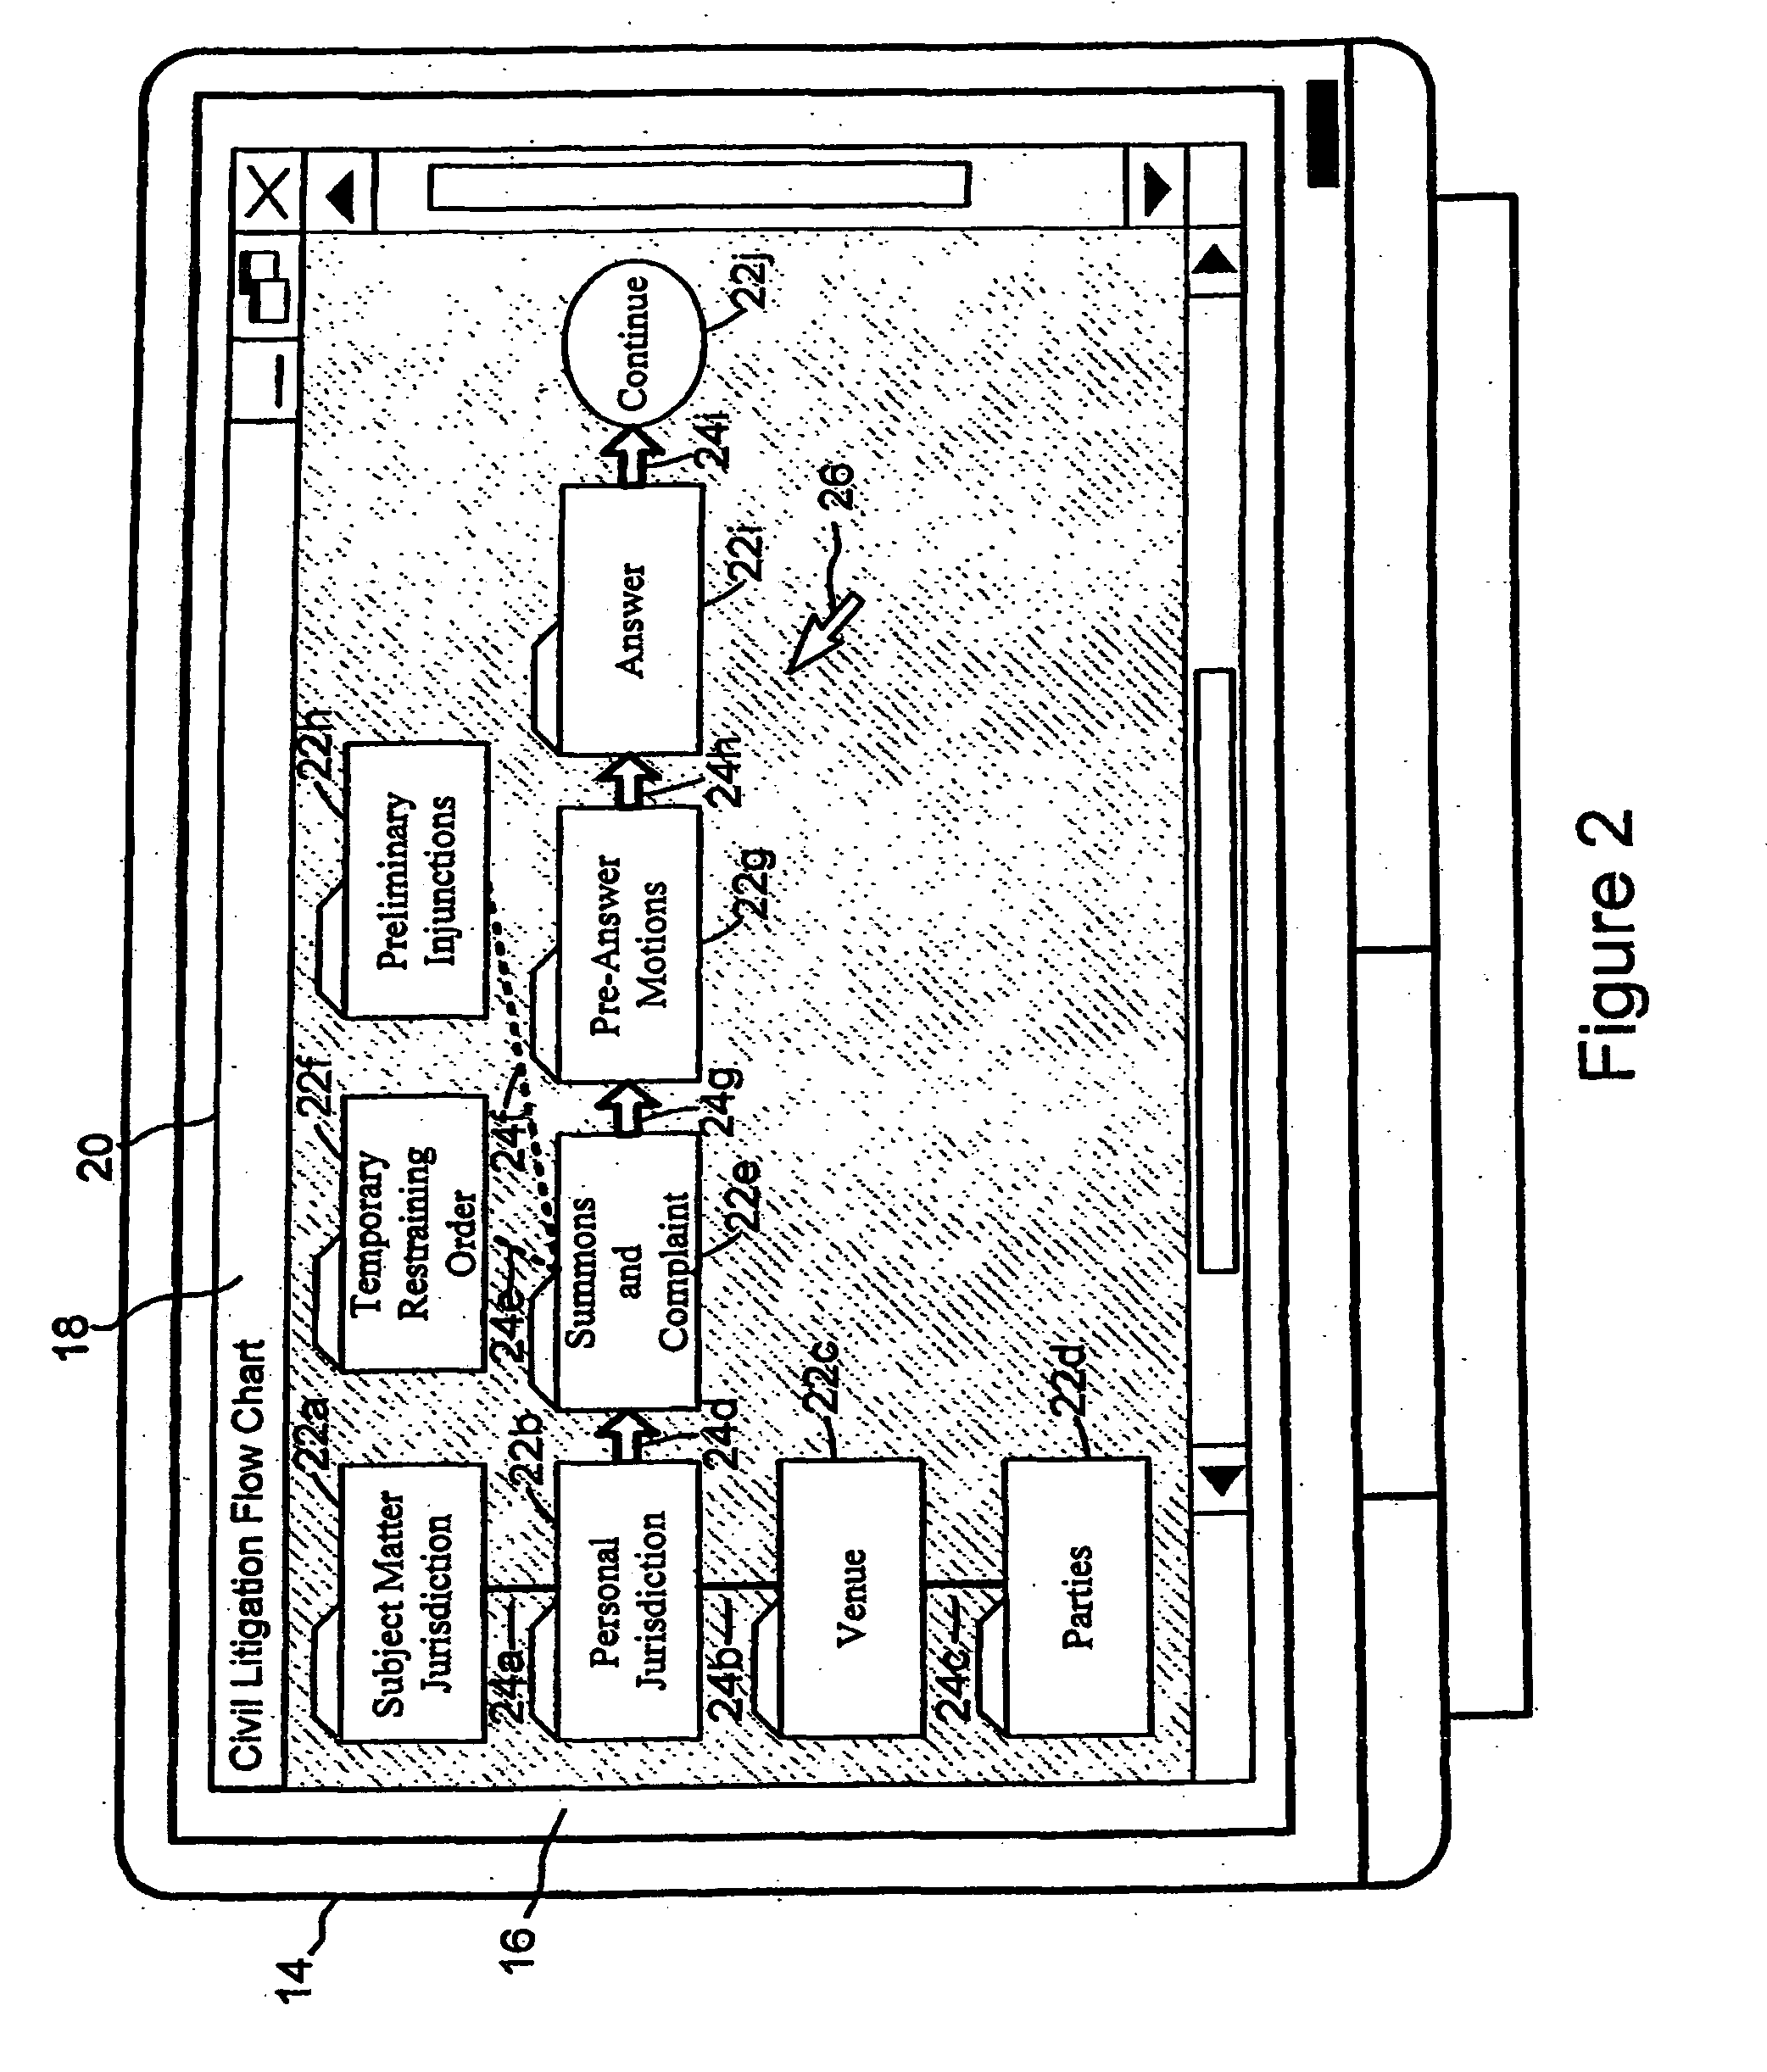 Electronic file system graphical user interface